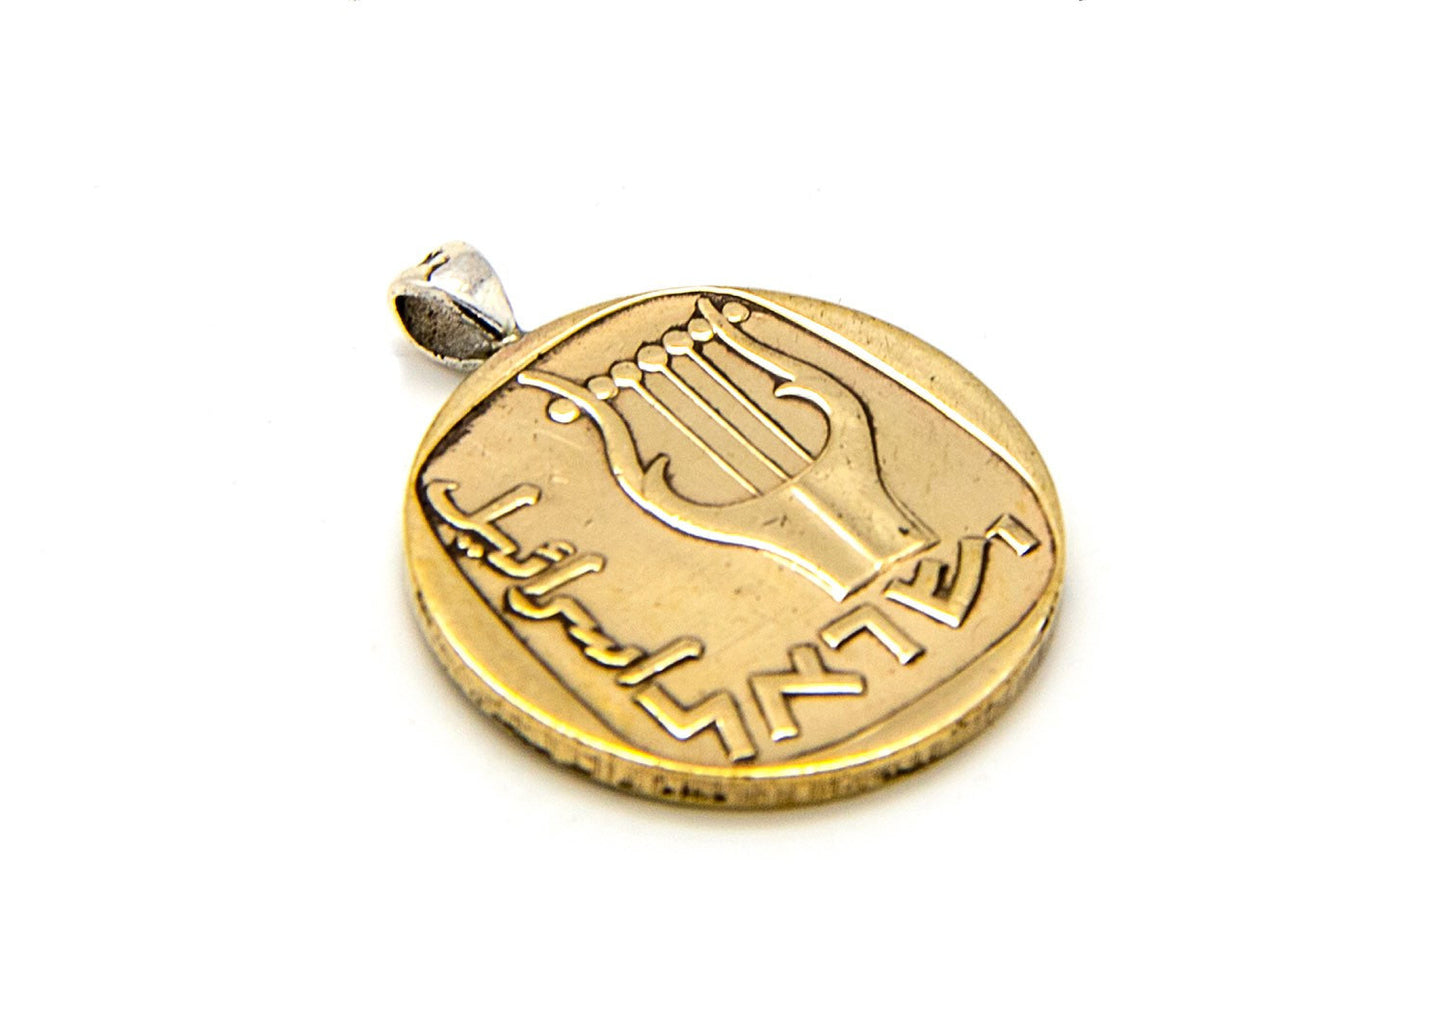 Israeli Old, Collector's Coin Pendant - 25 Agorot Israel Coin Necklace